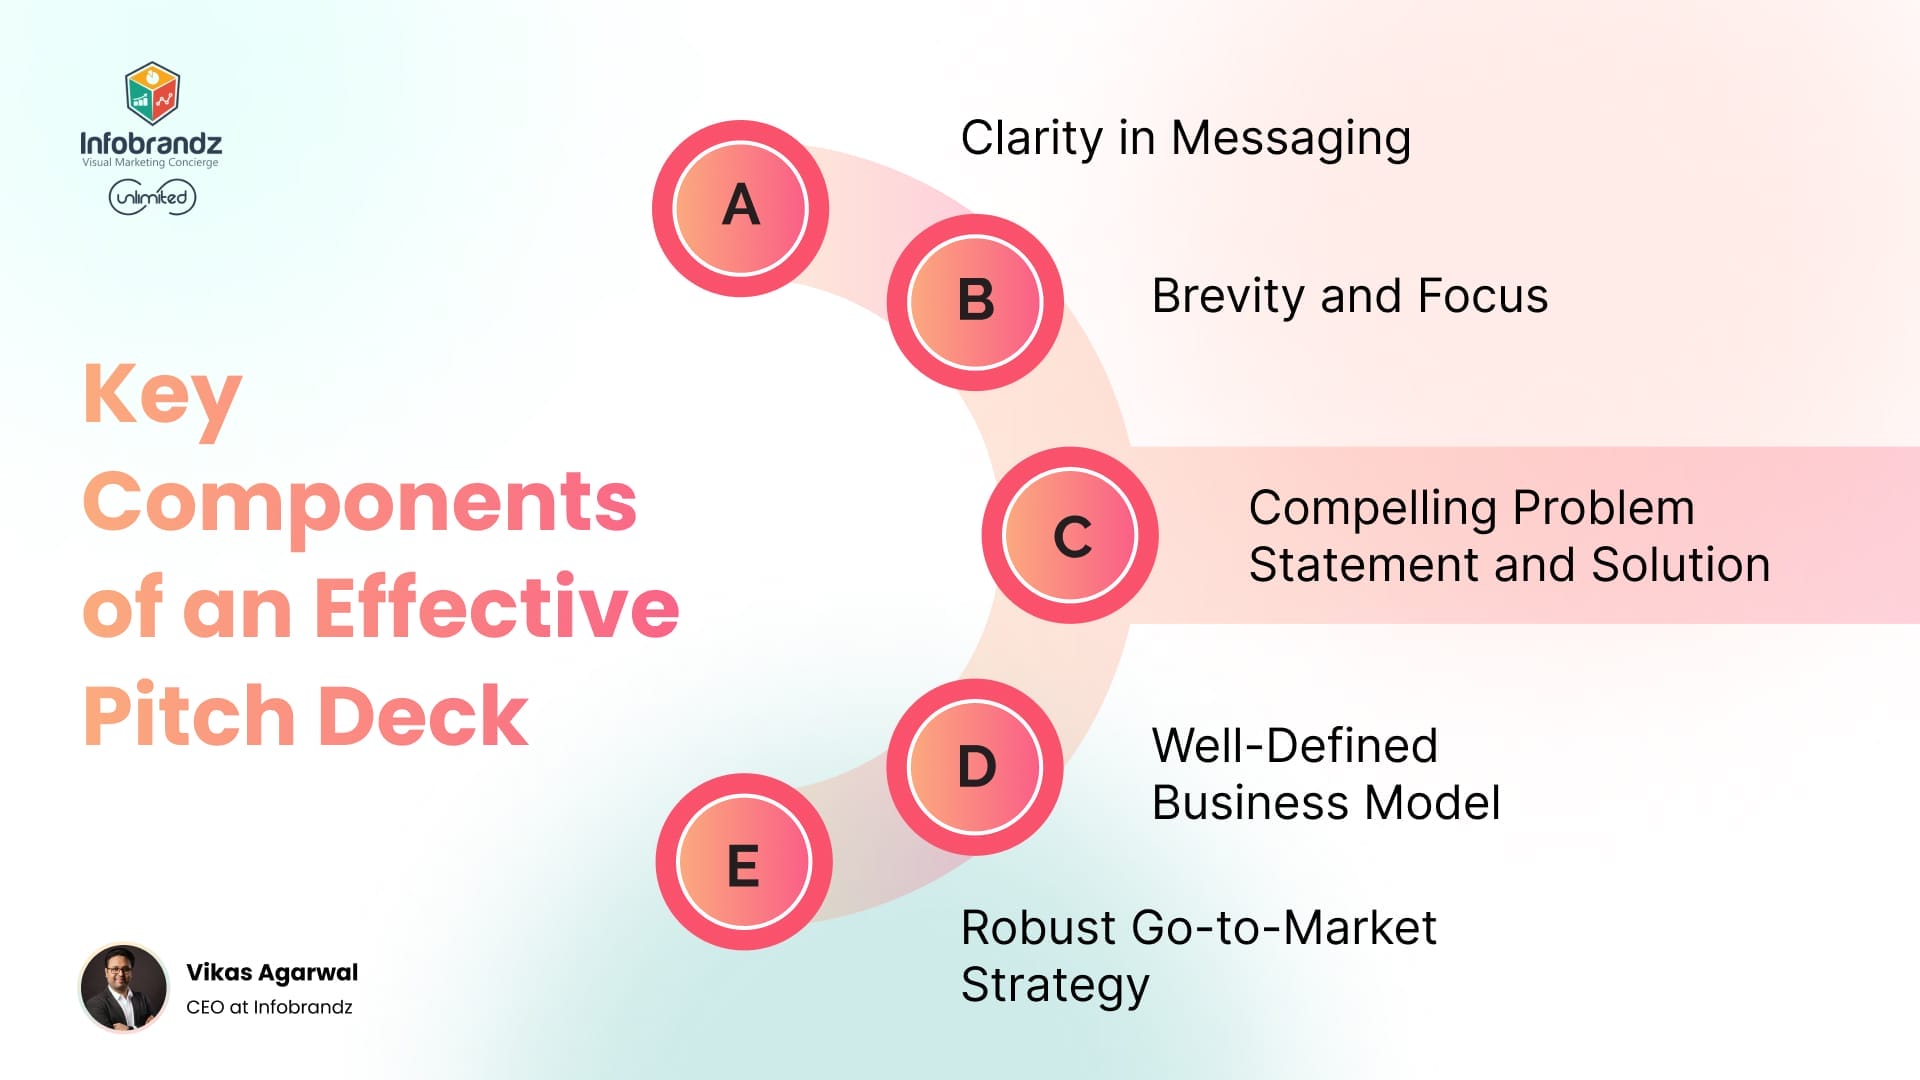 Key Components of an Effective Pitch Deck